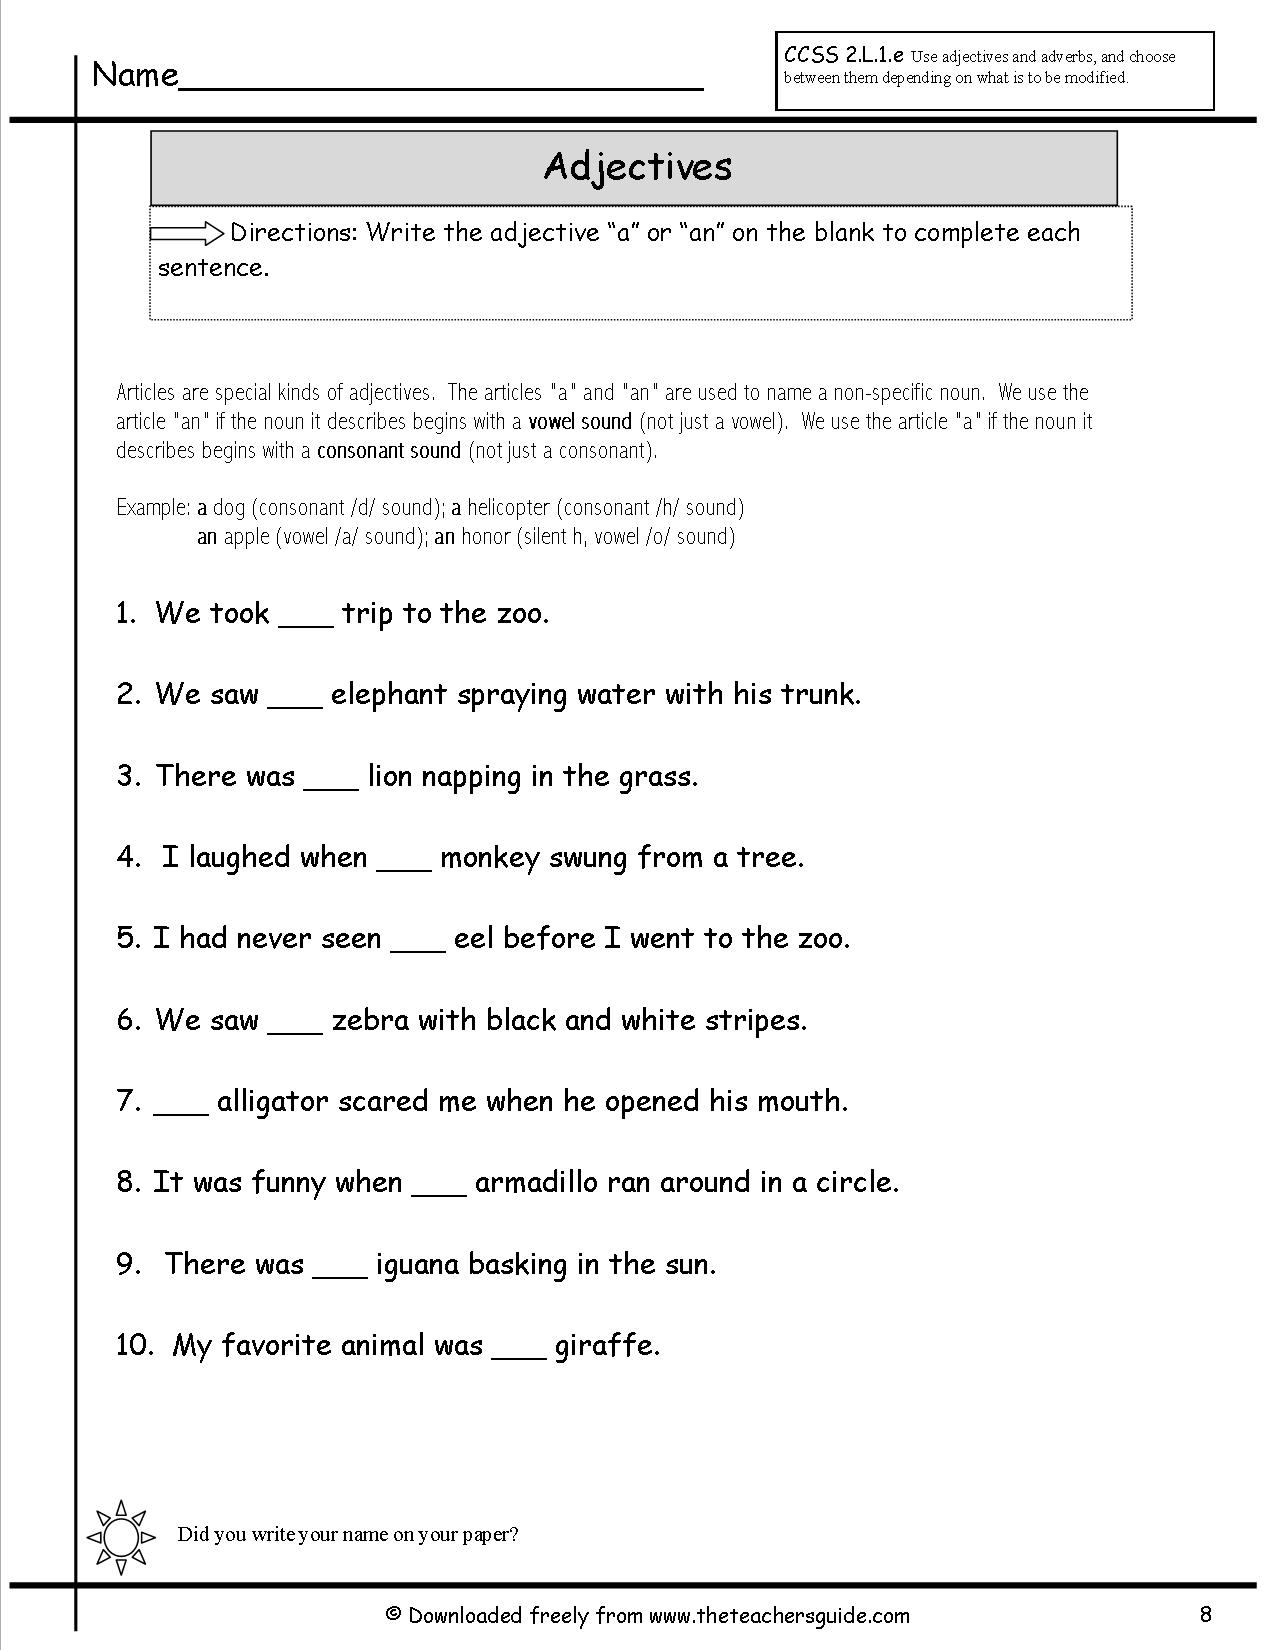 Adjectives And Articles Worksheets